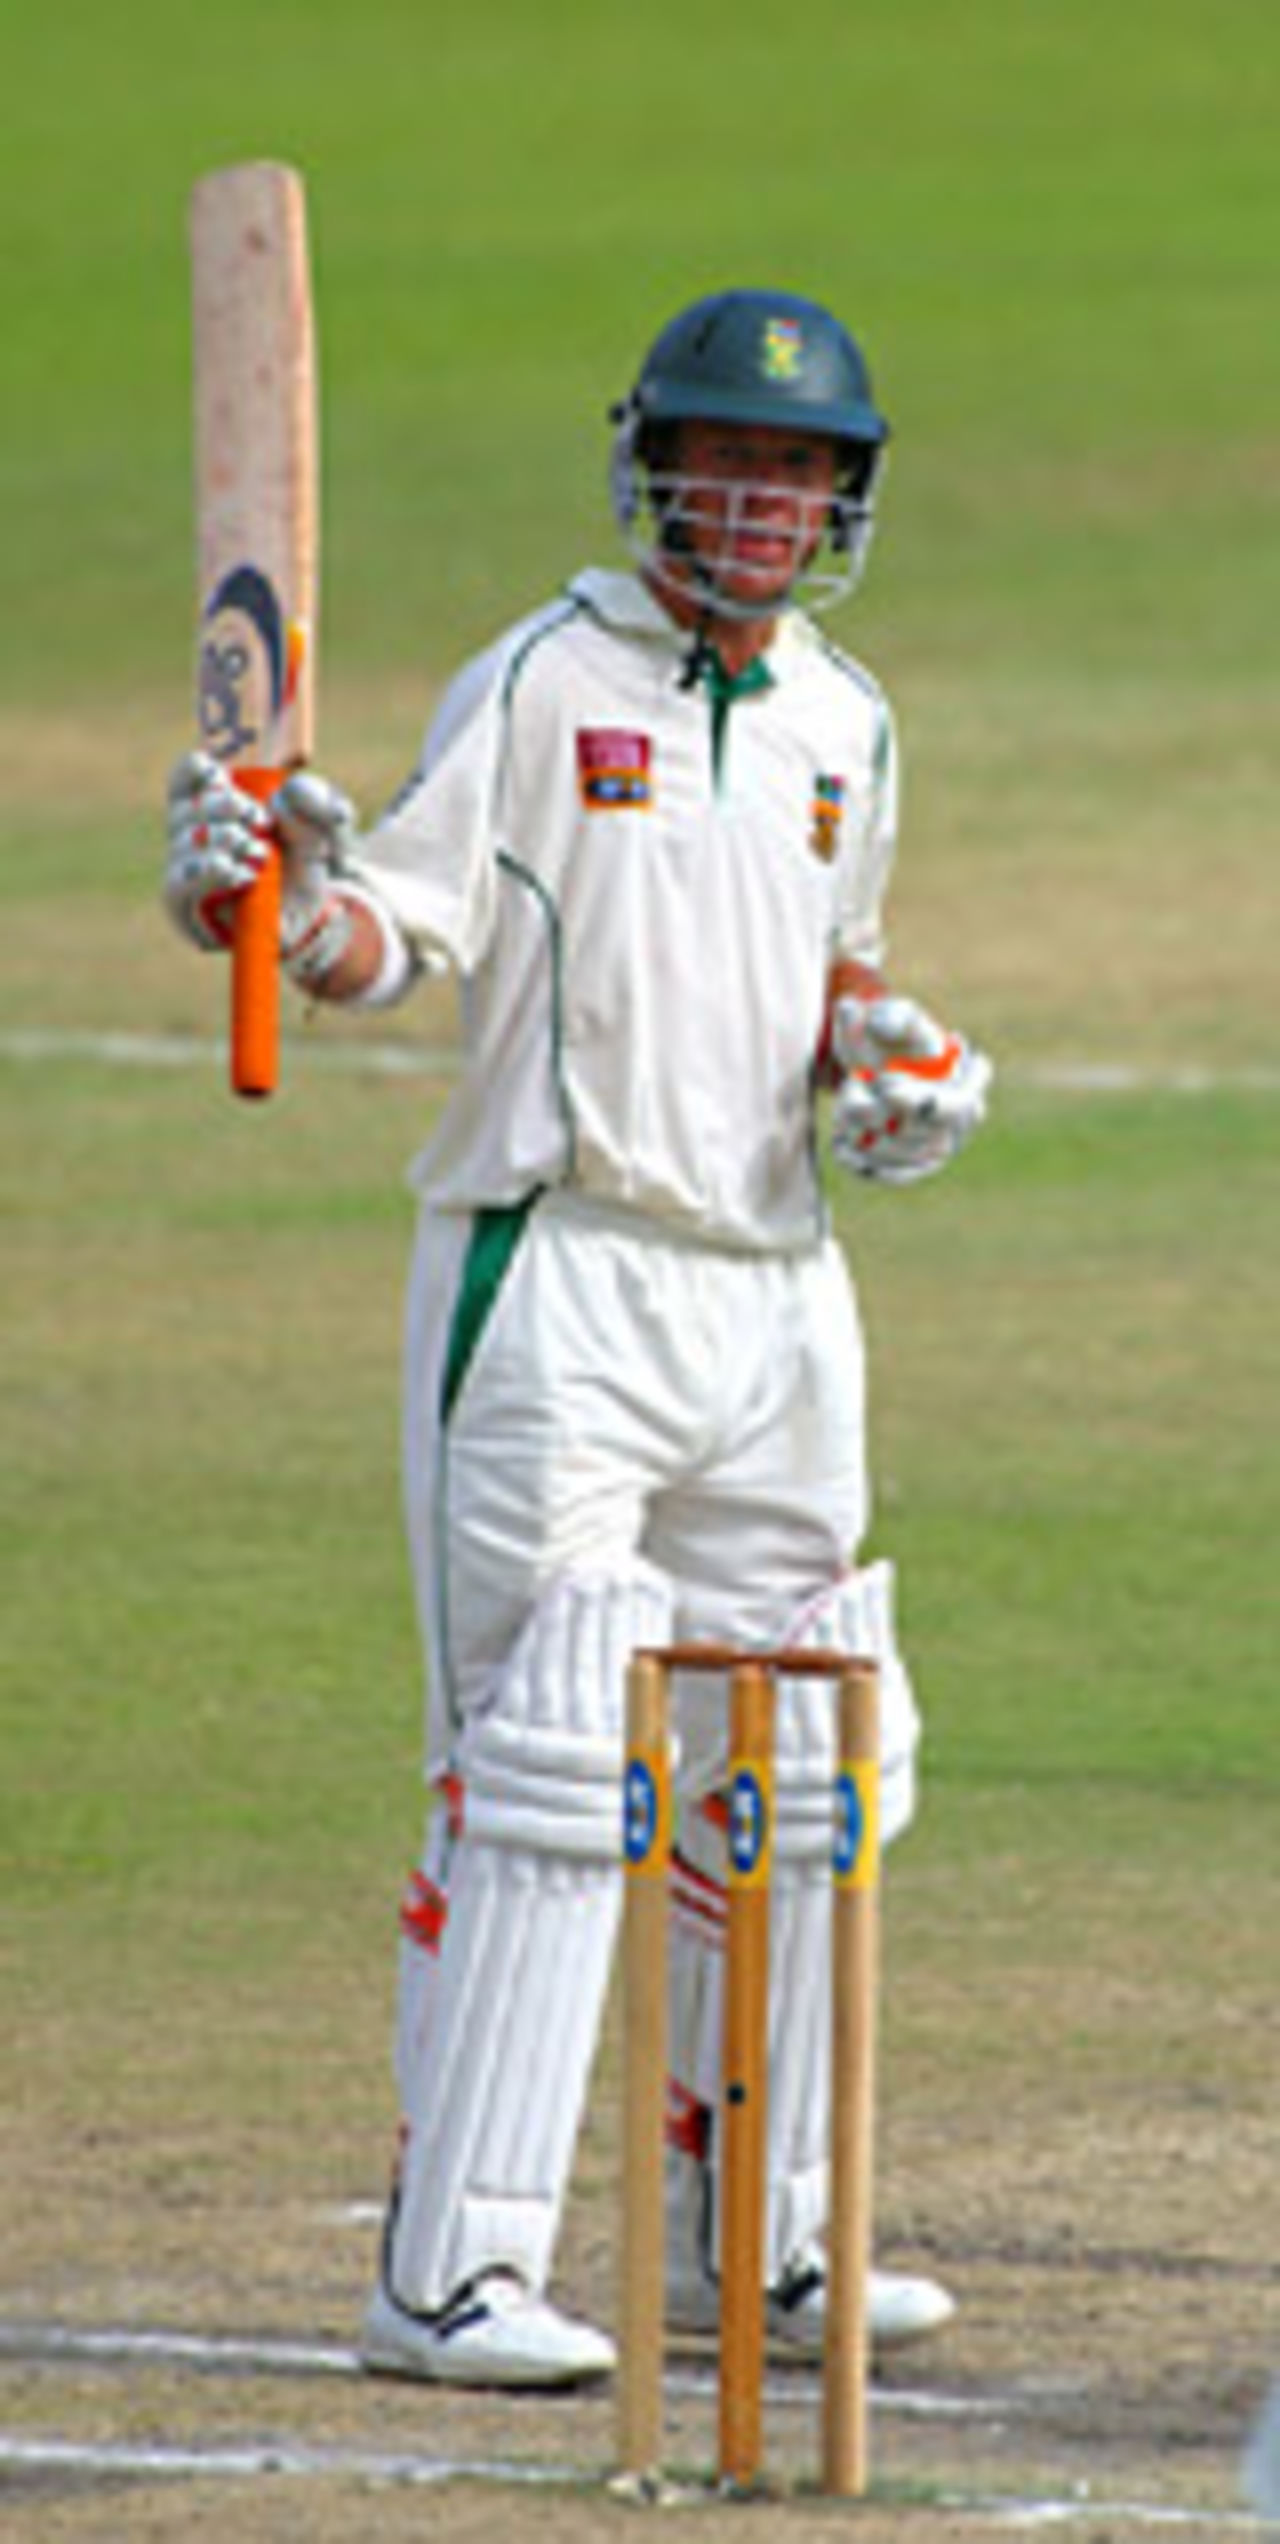 AB de Villiers acknowledges his half century, South Africa v England, 2nd Test, Durban, 5th day, December 30 2004